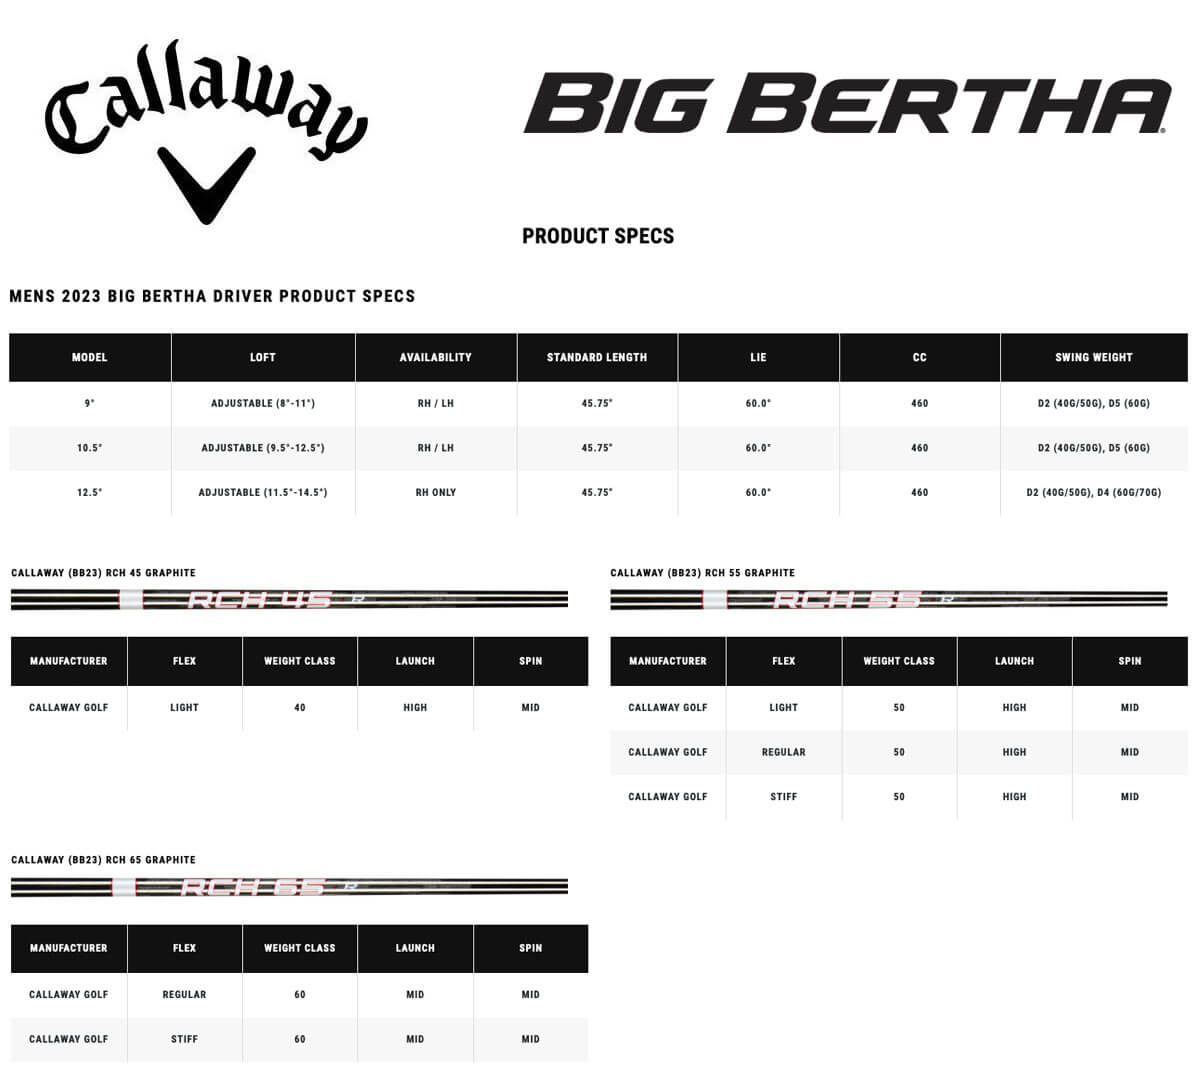 Specification for Callaway Big Bertha Driver